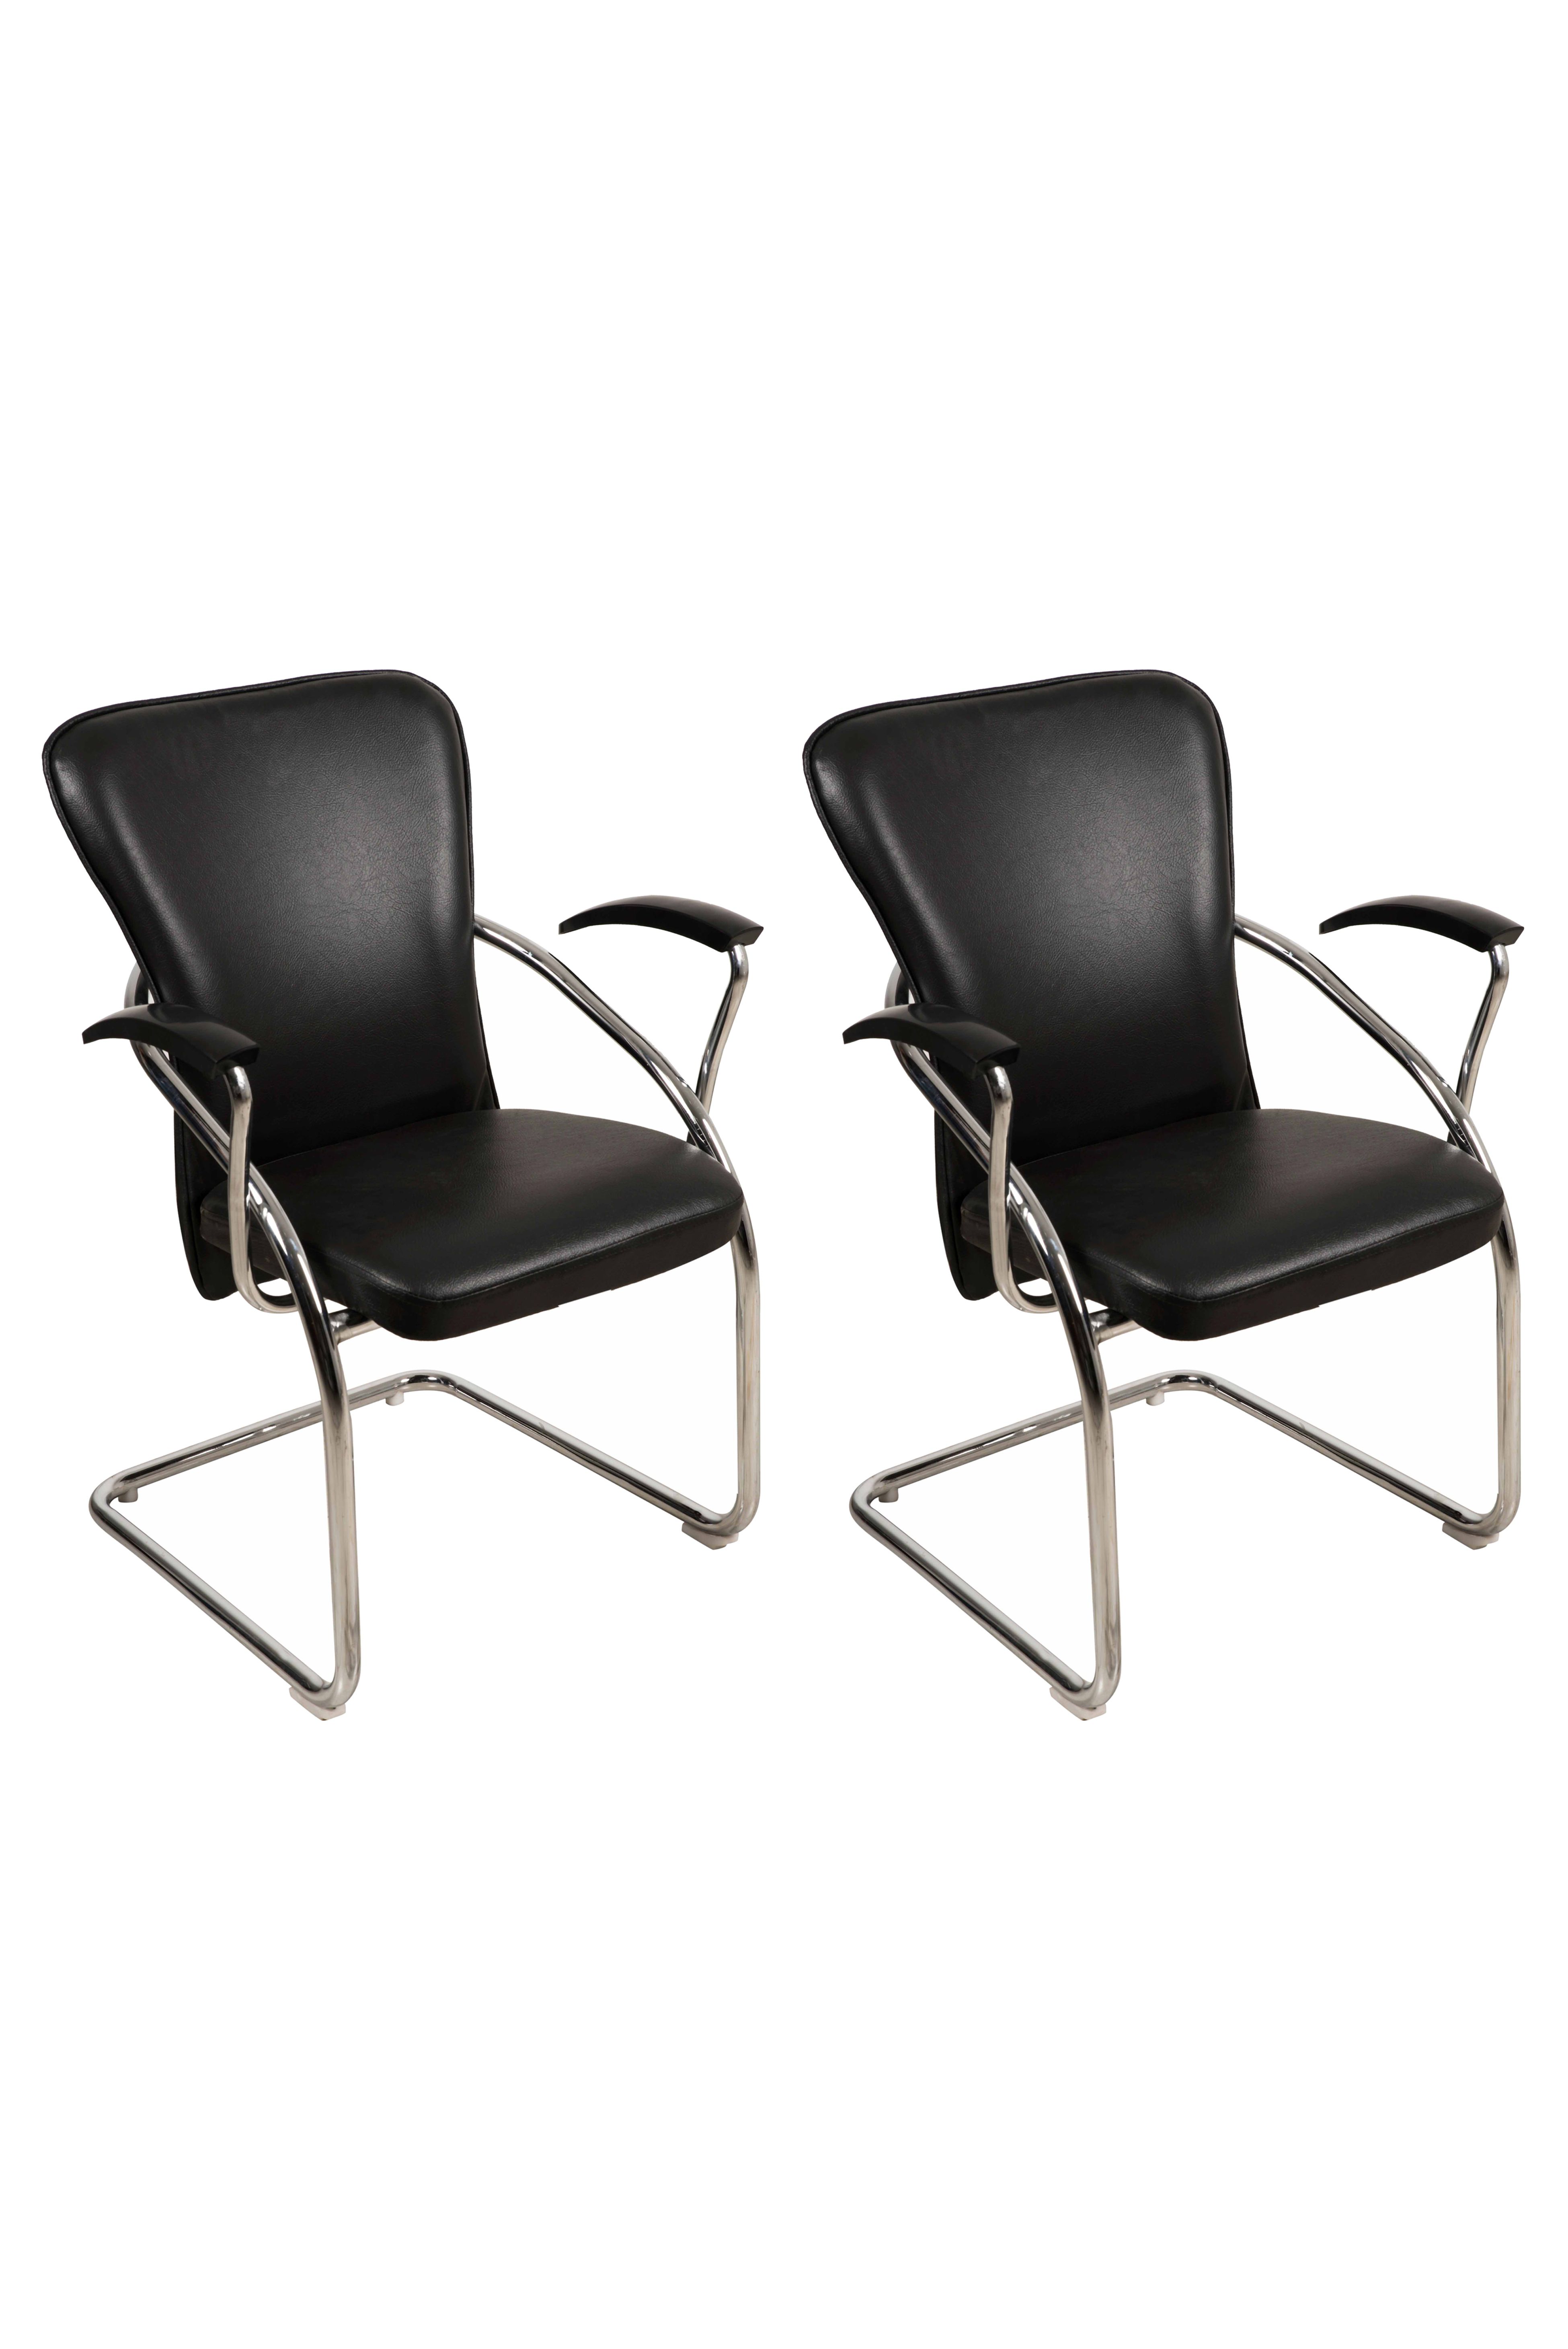 Buy 1 Visitor Chair Get 1 Free - Buy Buy 1 Visitor Chair Get 1 Free